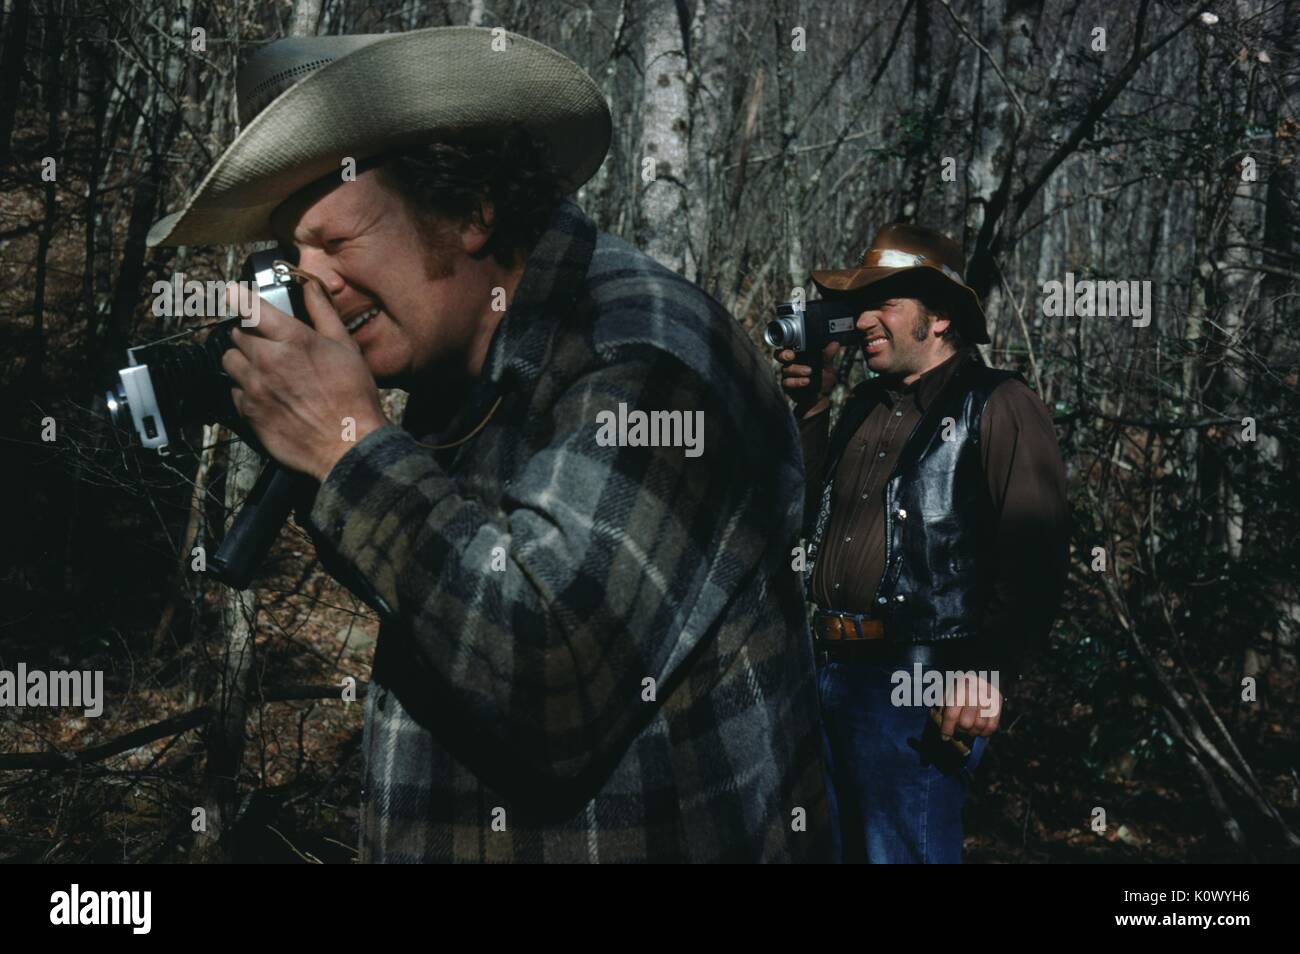 Two hunters in the woods, dressed in flannel and cowboy hats, one looking through the lens of a 35mm still camera, the other looking through the lens of an 8mm home movie film camera, surrounded by trees, Parched Corn Creek, Kentucky, 1975. Photo credit Smith Collection/Gado/Getty Images. Stock Photo